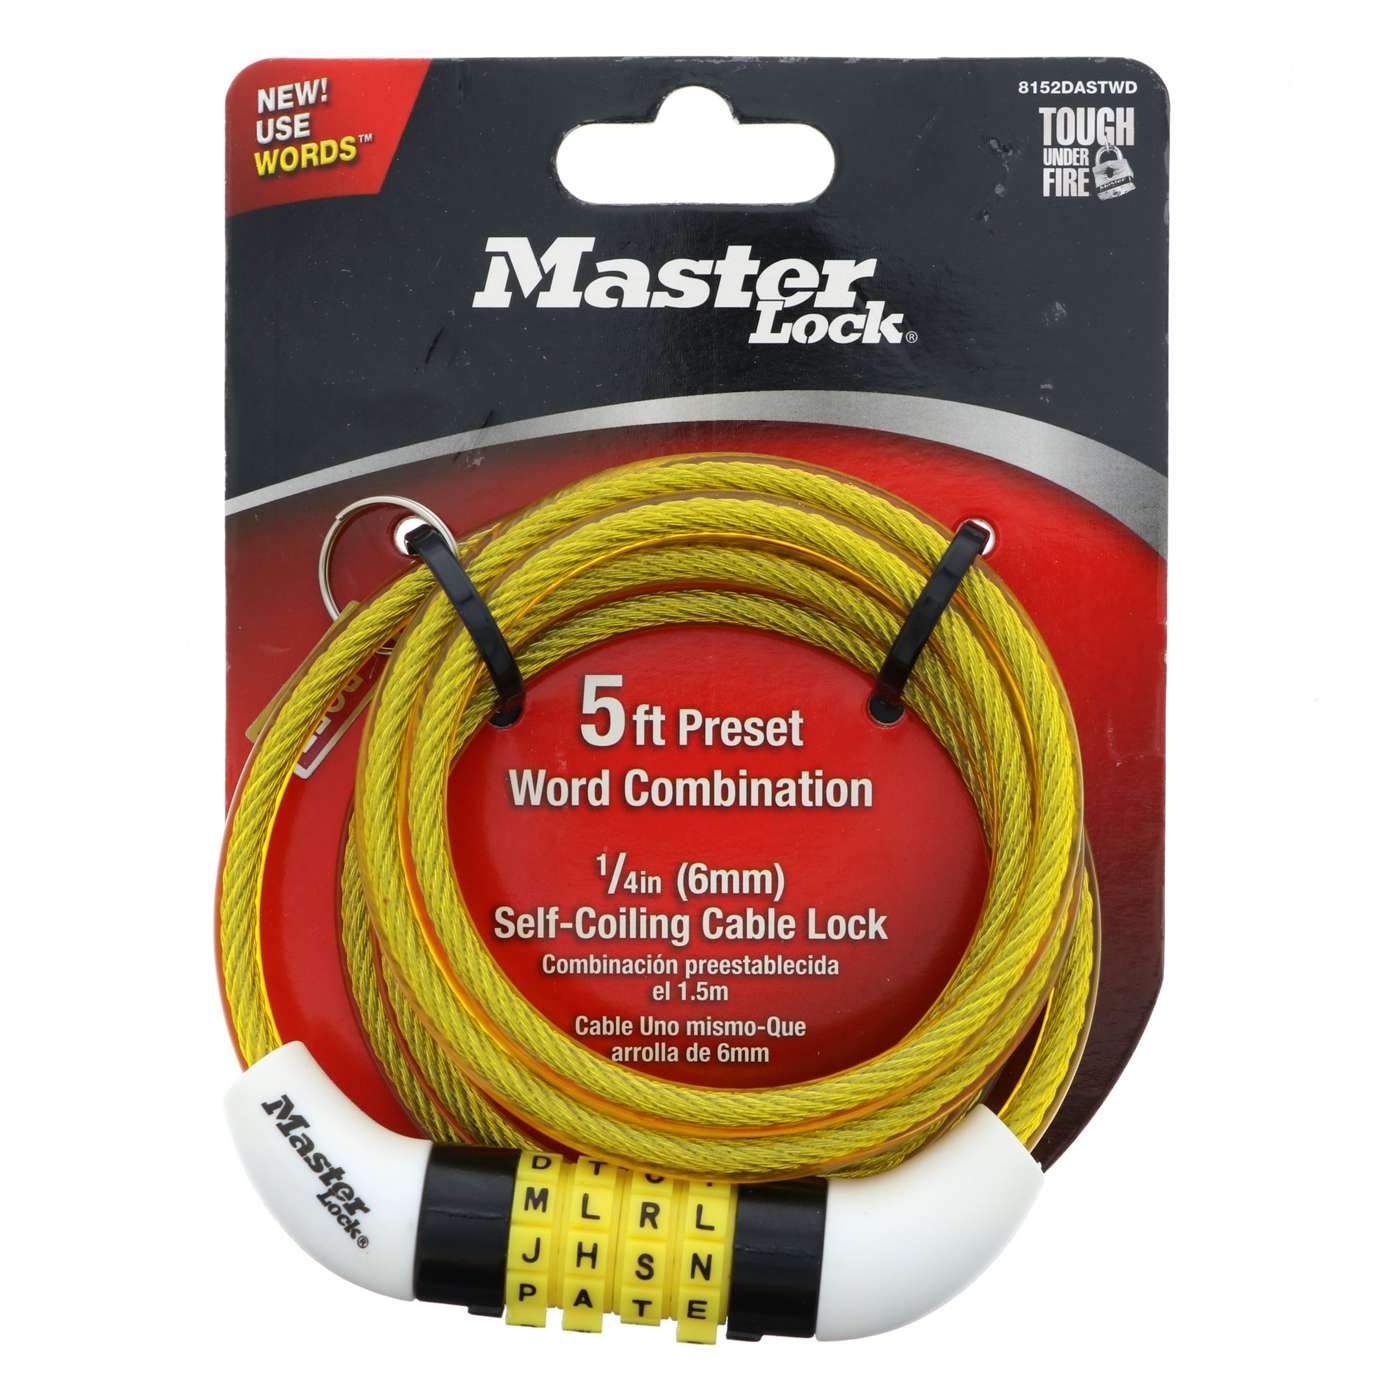 Master Lock Combination Cable Lock, Colors May Vary; image 2 of 4